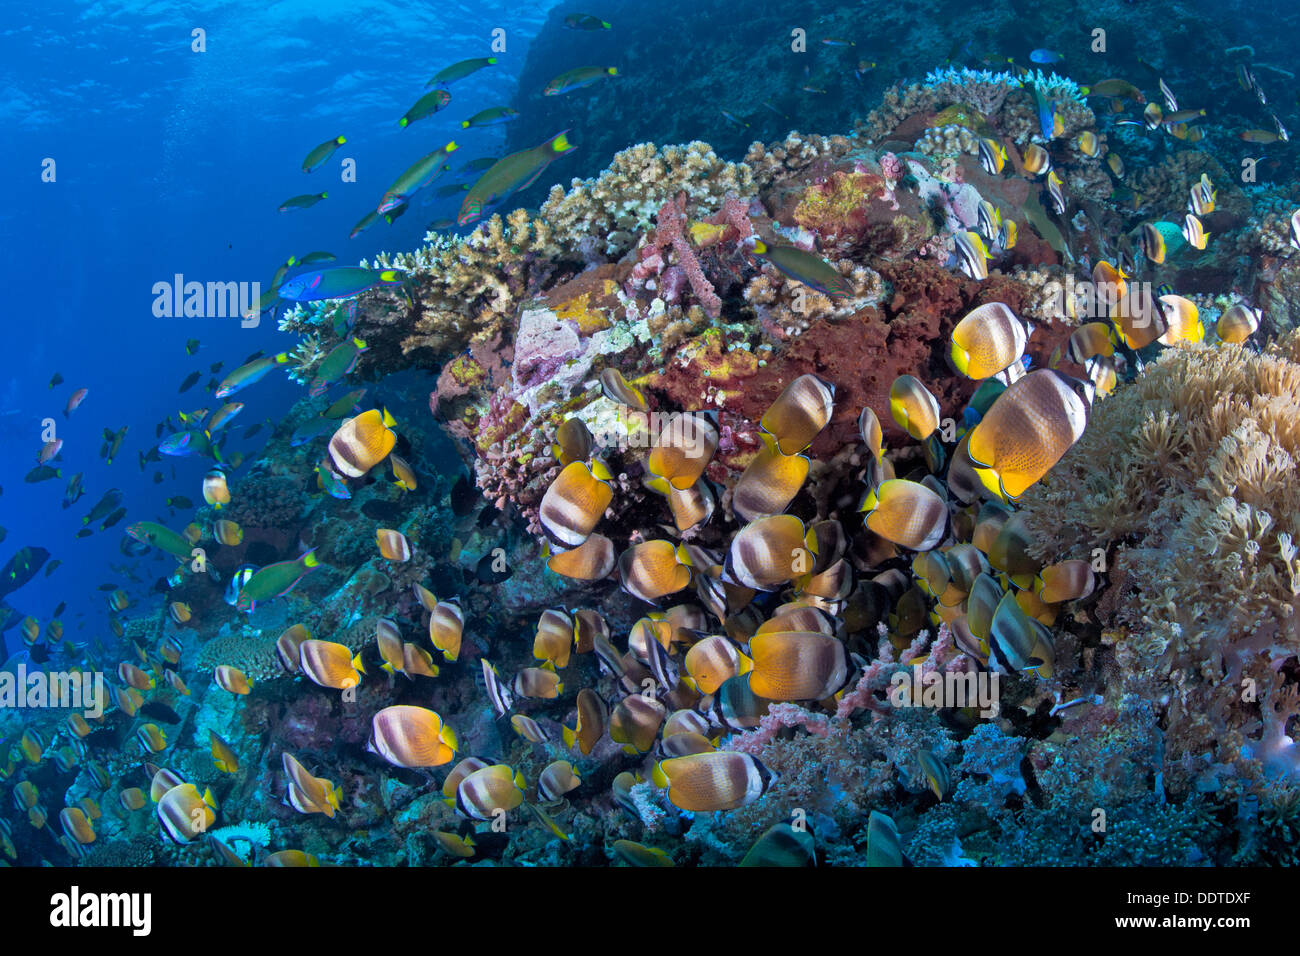 Sunset Butterflyfish, Moon Wrasse and other reef fish feast on nesting eggs. Verde Island, Philippines. Stock Photo